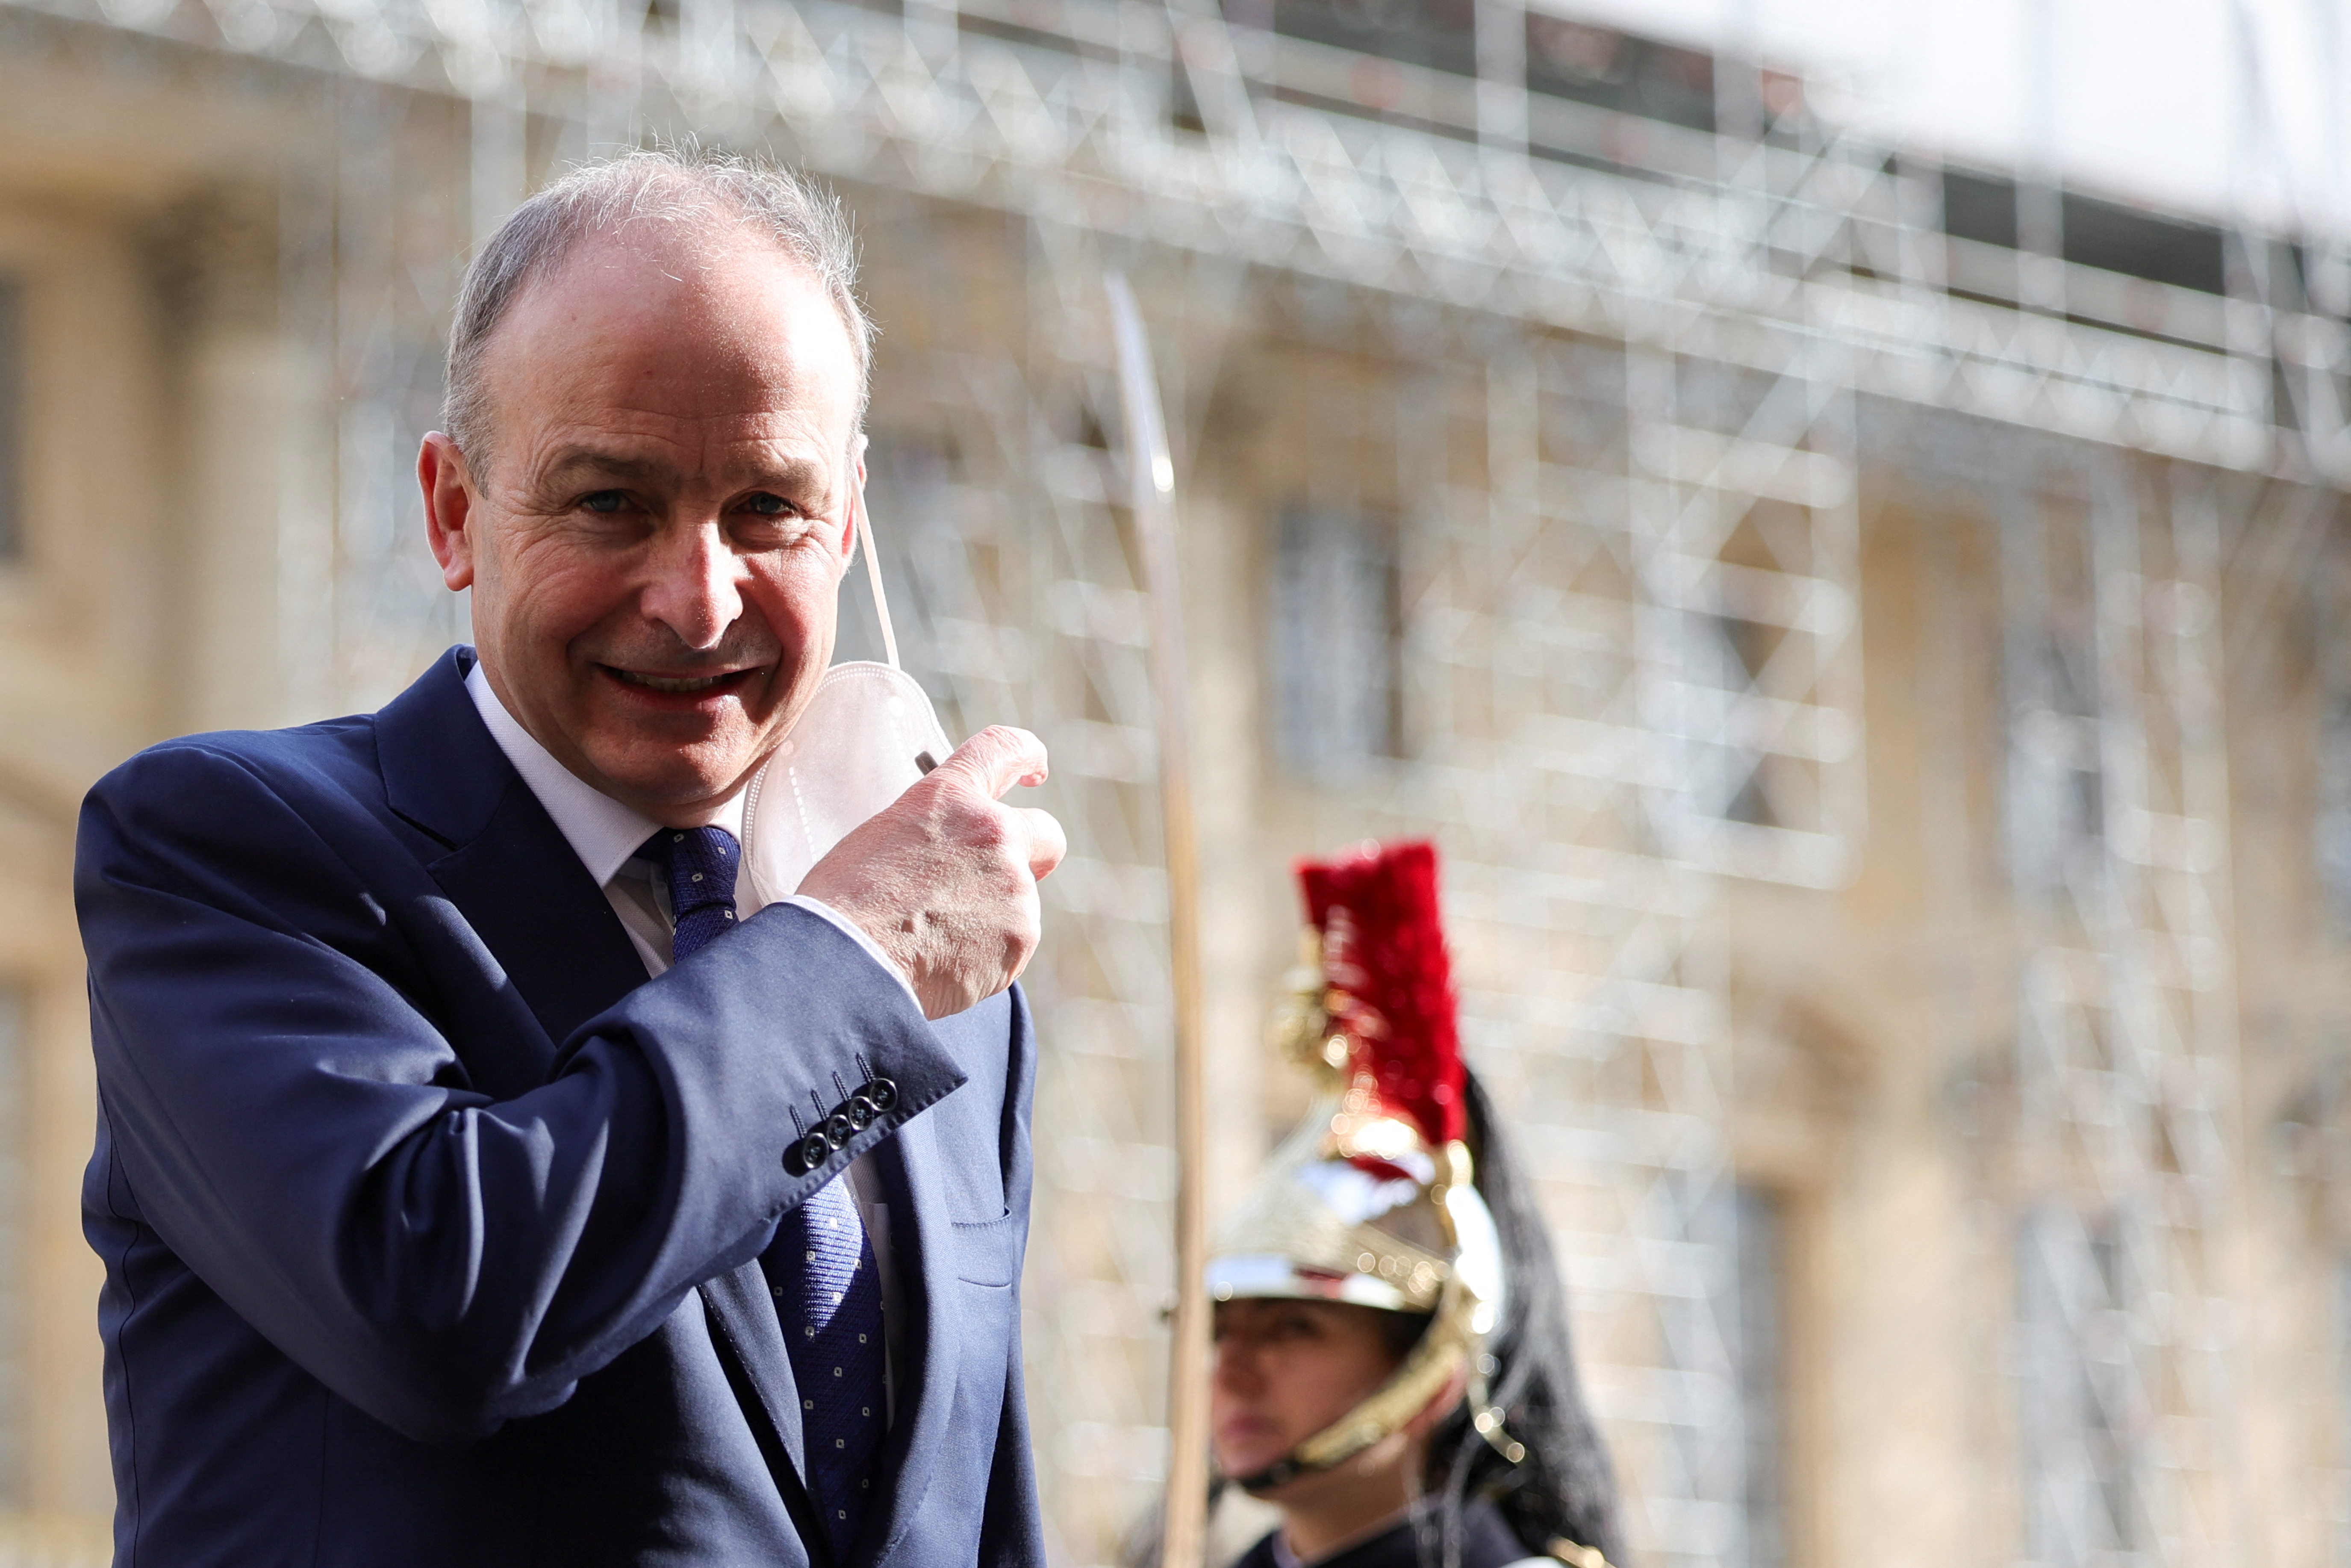 Irish Prime Minister Micheal Martin arrives to attend an informal summit of EU leaders at the Chateau de Versailles (